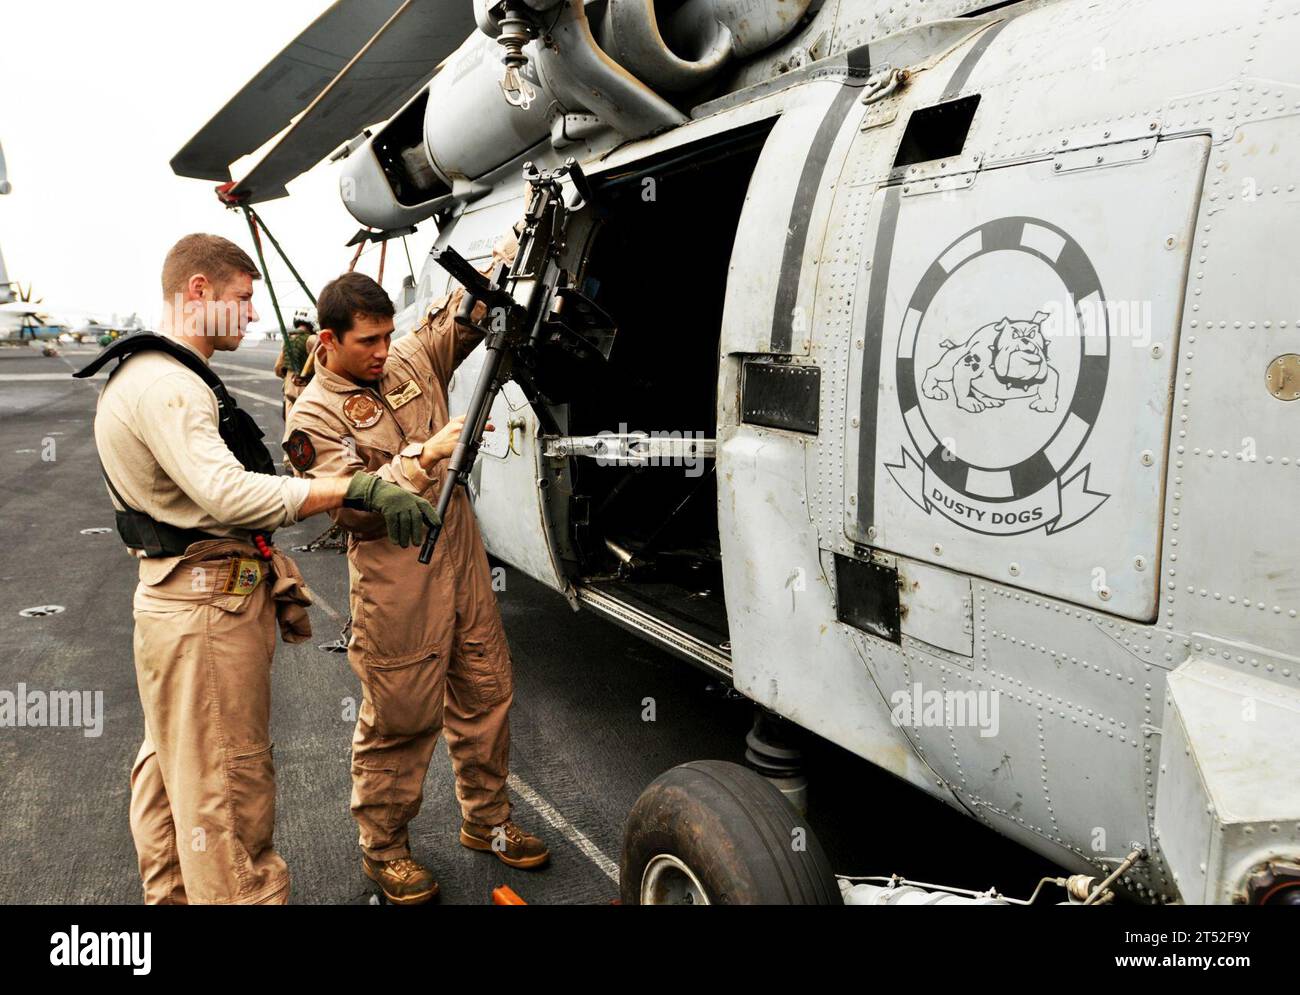 1007296003P-028  U.S. 5TH FLEET AREA OF RESPONSIBILITY (July 29, 2010) Naval Air Crewman 3rd Class Daniel Hersh, left, and Naval Air Crewman 2nd Class Gabriel Rodriguez, both assigned to the Dusty Dogs of Helicopter Anti-Submarine Squadron (HS) 7, perform a pre-flight check on an M-240B machine gun on the flight deck of the aircraft carrier USS Harry S. Truman (CVN 75). HS-7 is deployed as part of the Harry S. Truman Carrier Strike Group supporting maritime security operations and theater security cooperation efforts in the U.S. 5th Fleet area of responsibility. Navy Stock Photo